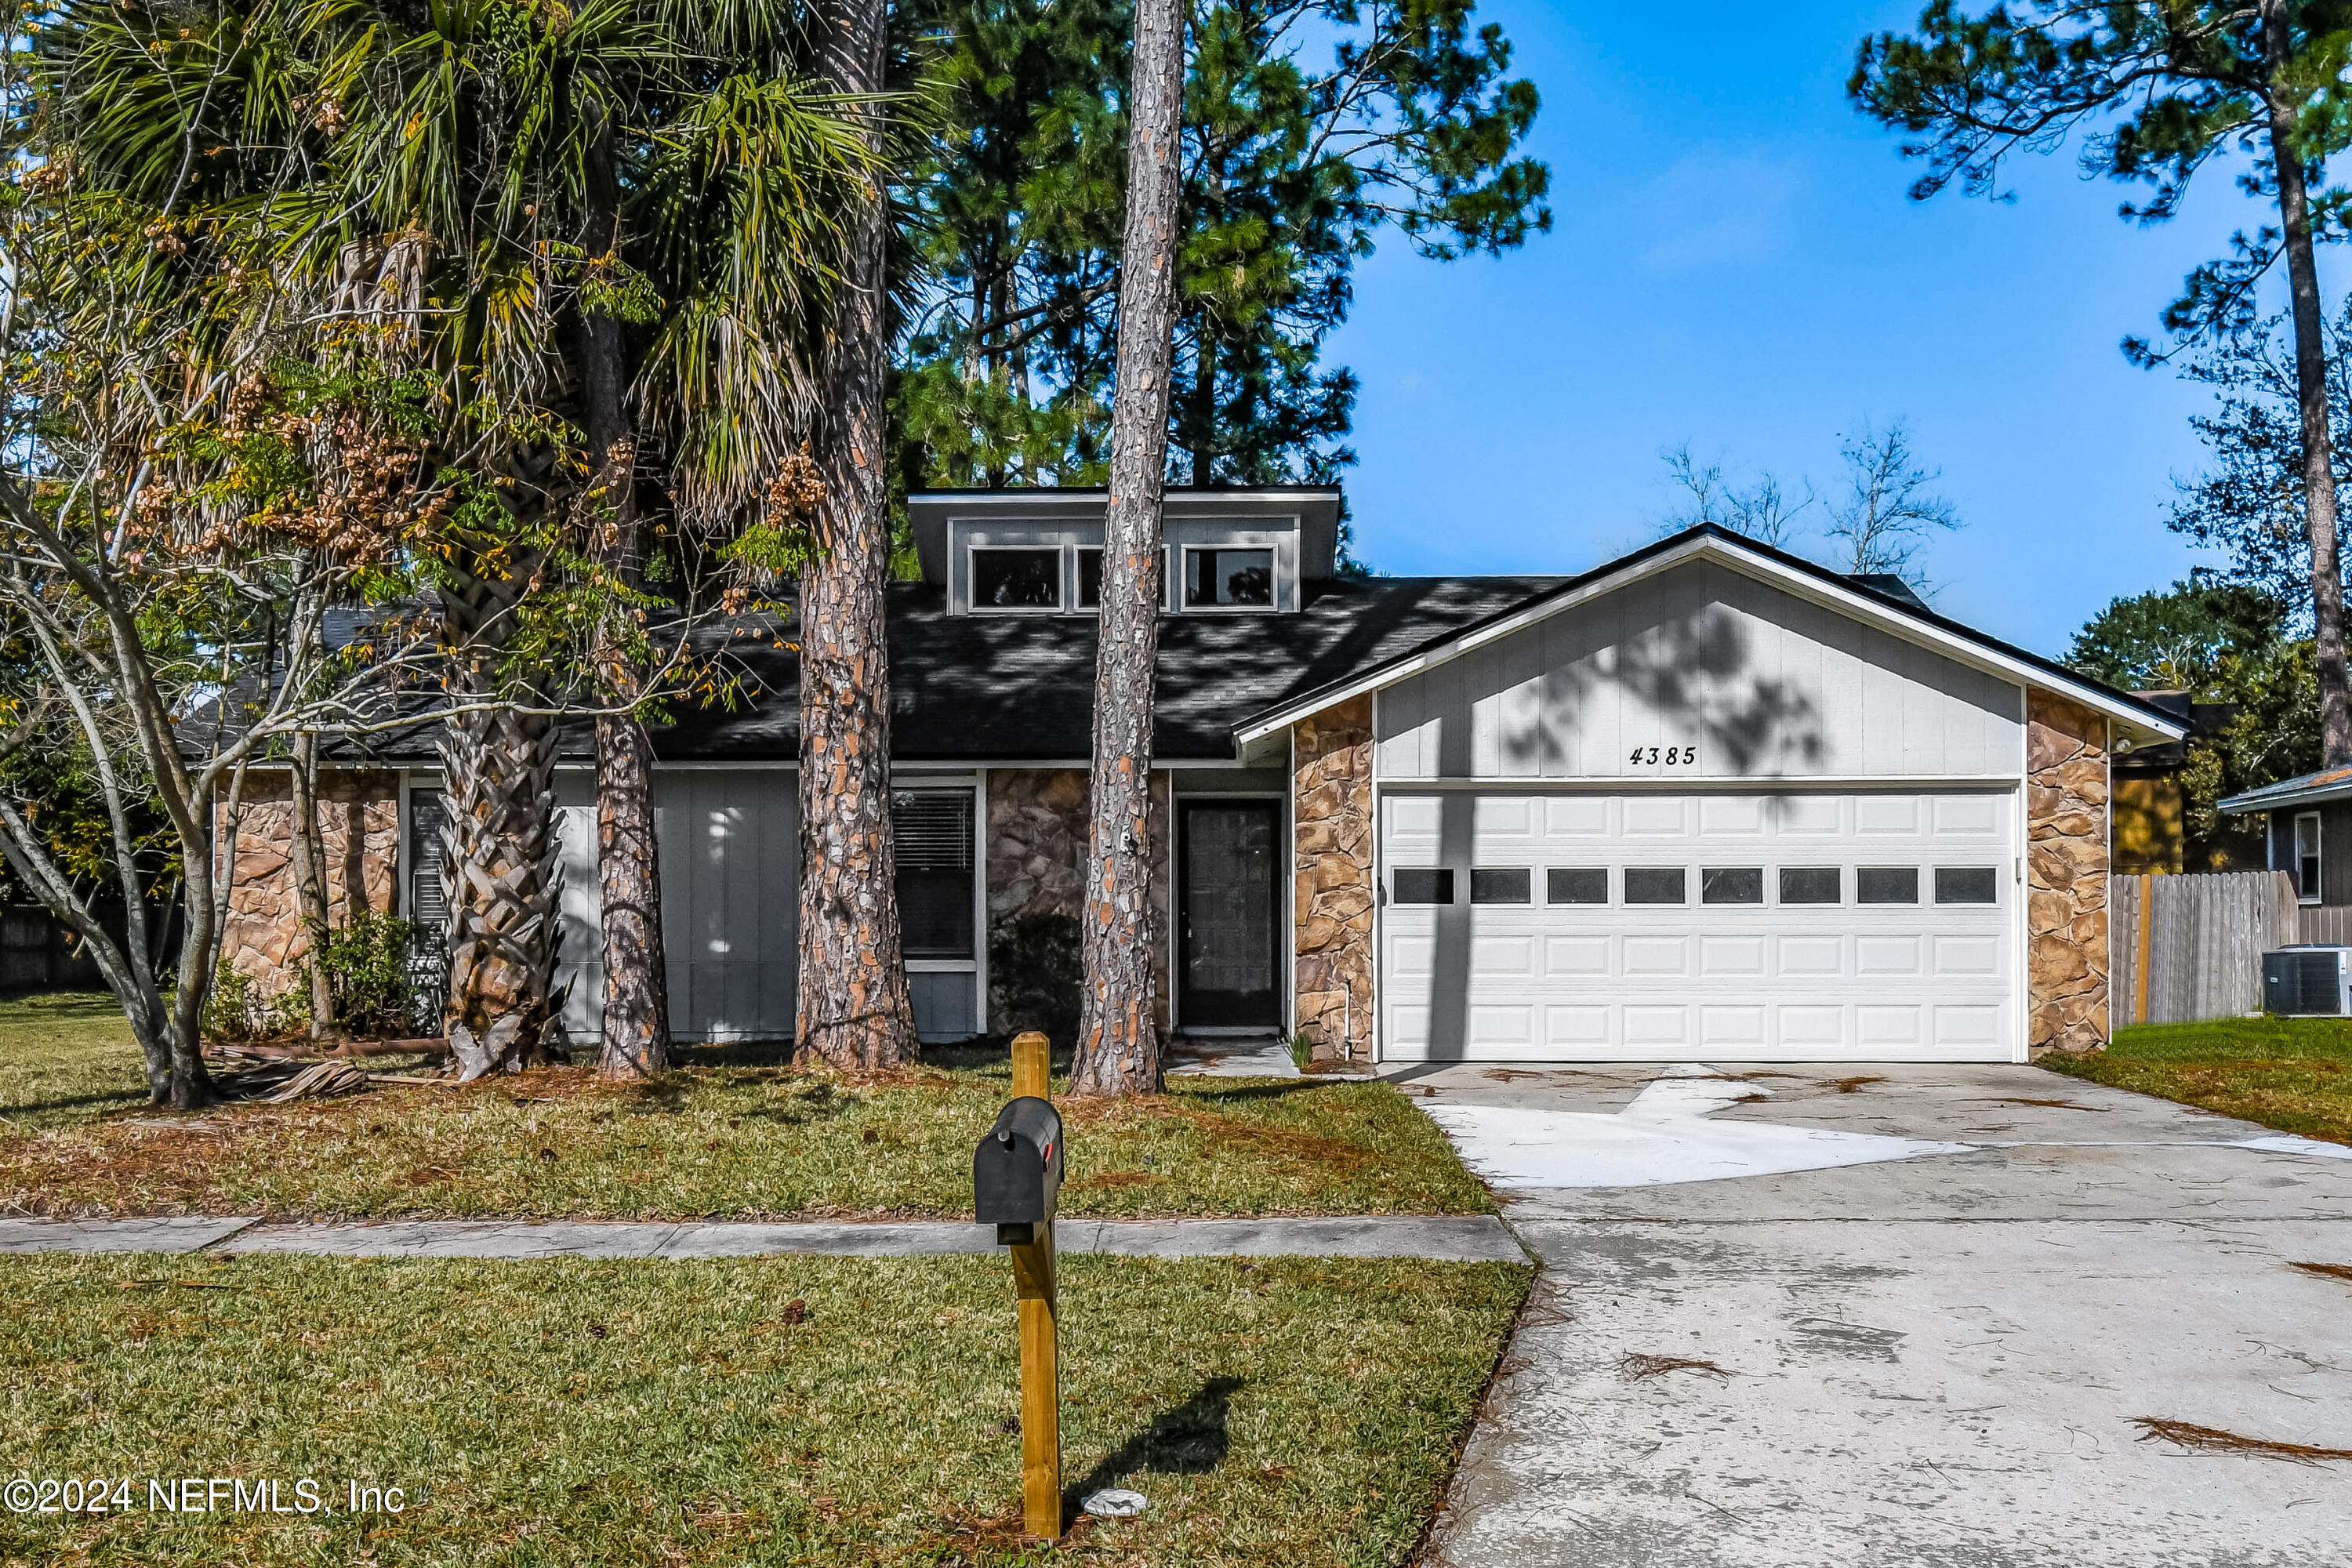 Jacksonville, FL home for sale located at 4385 Queensway Drive, Jacksonville, FL 32257